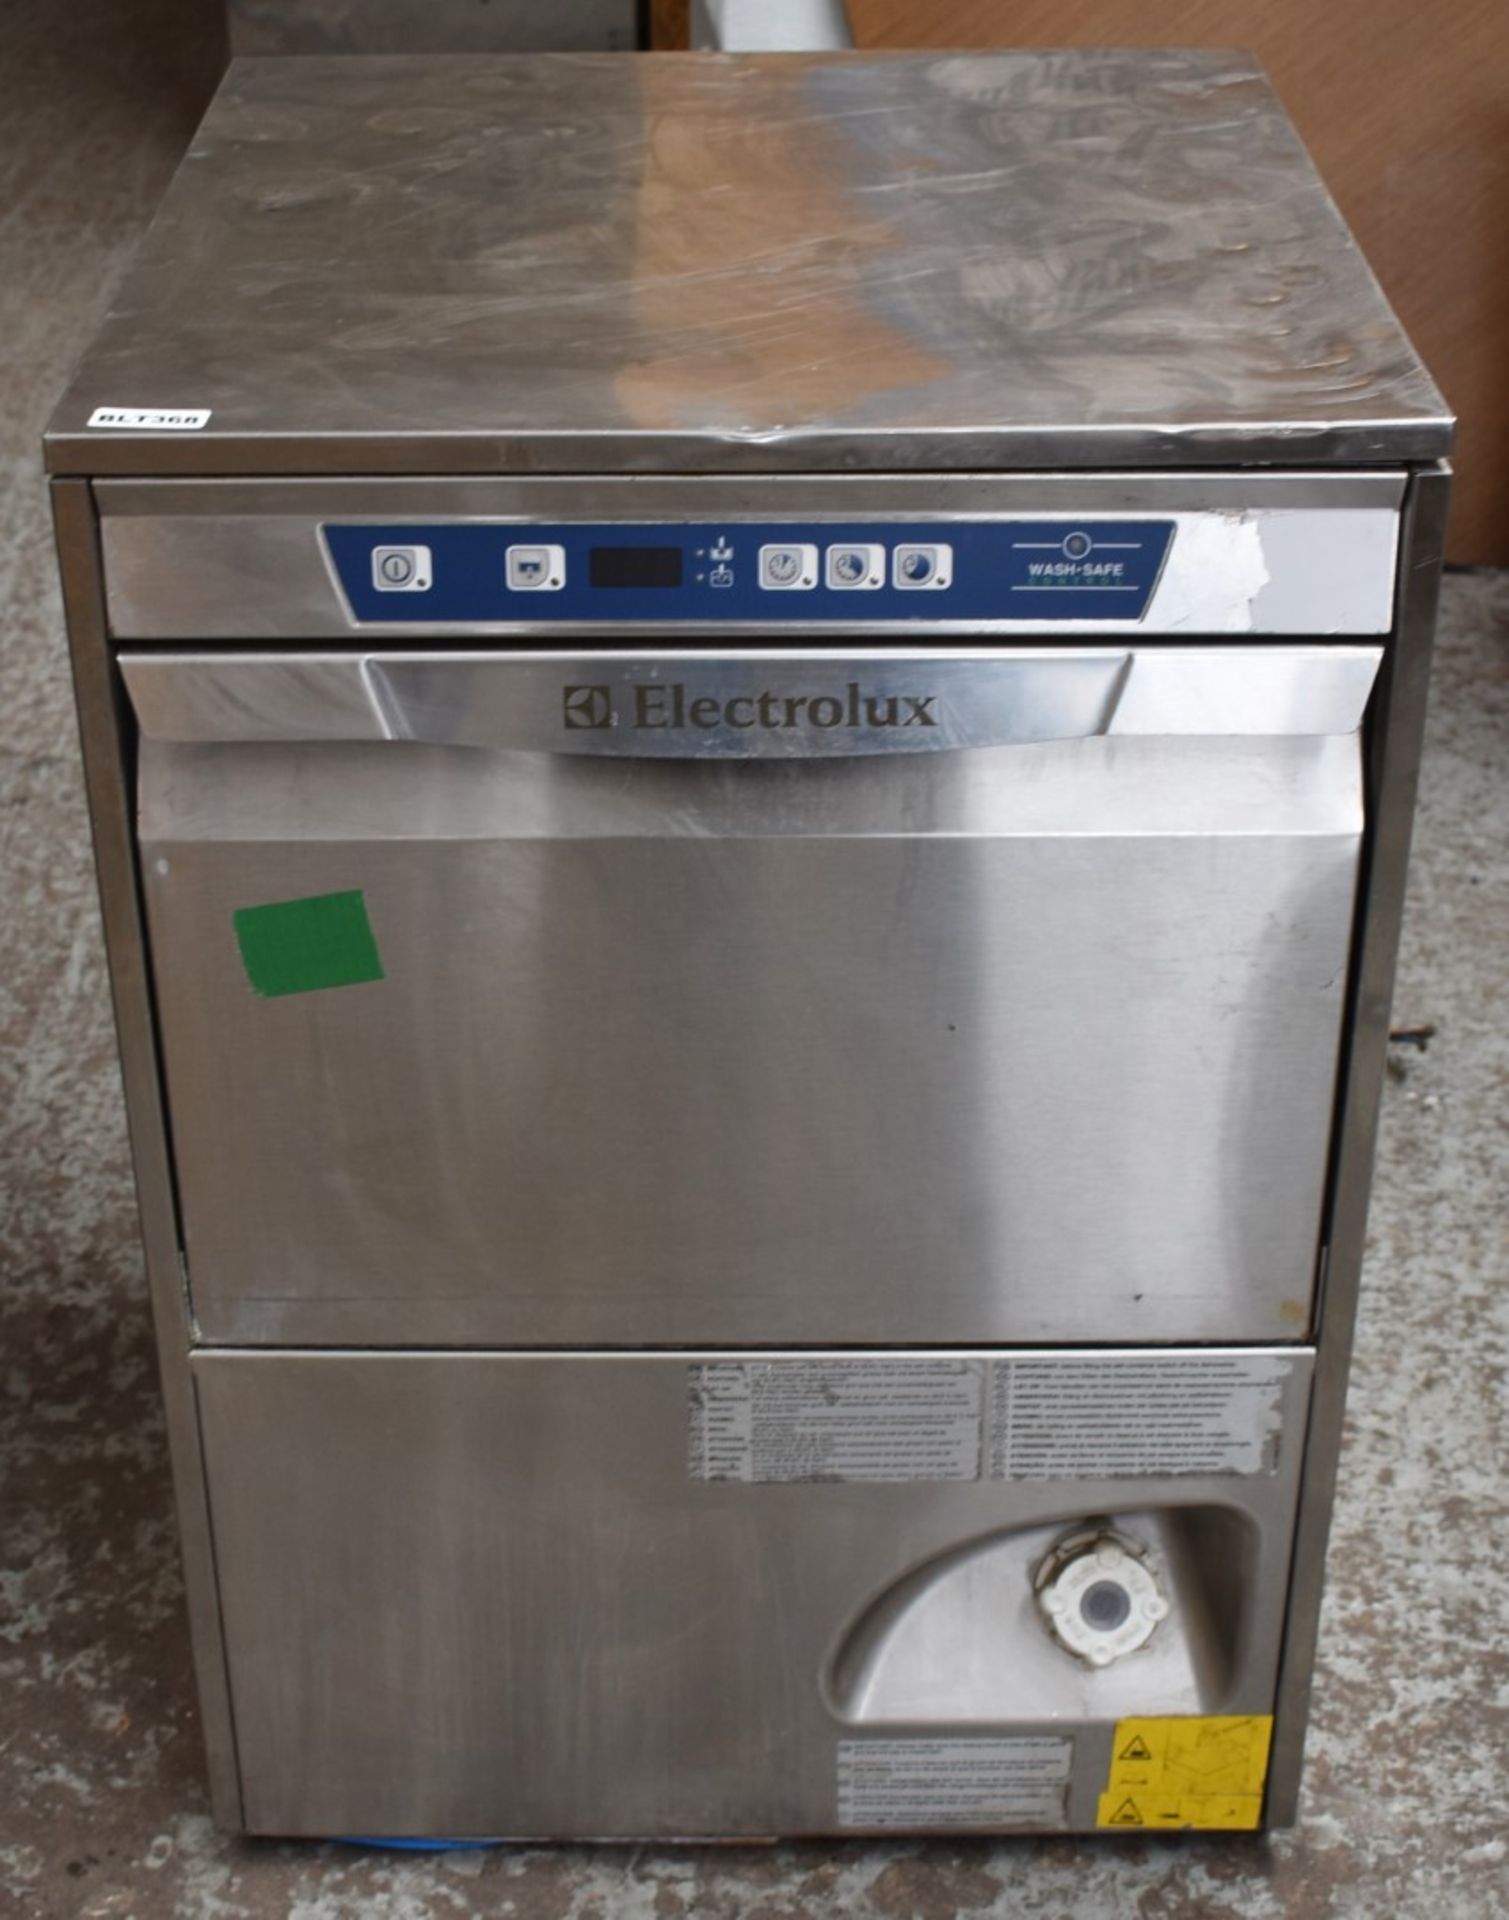 1 x Electrolux EUCAIG Undercounter Dishwasher - Green and Clean With Wash Safe Control - Stainless